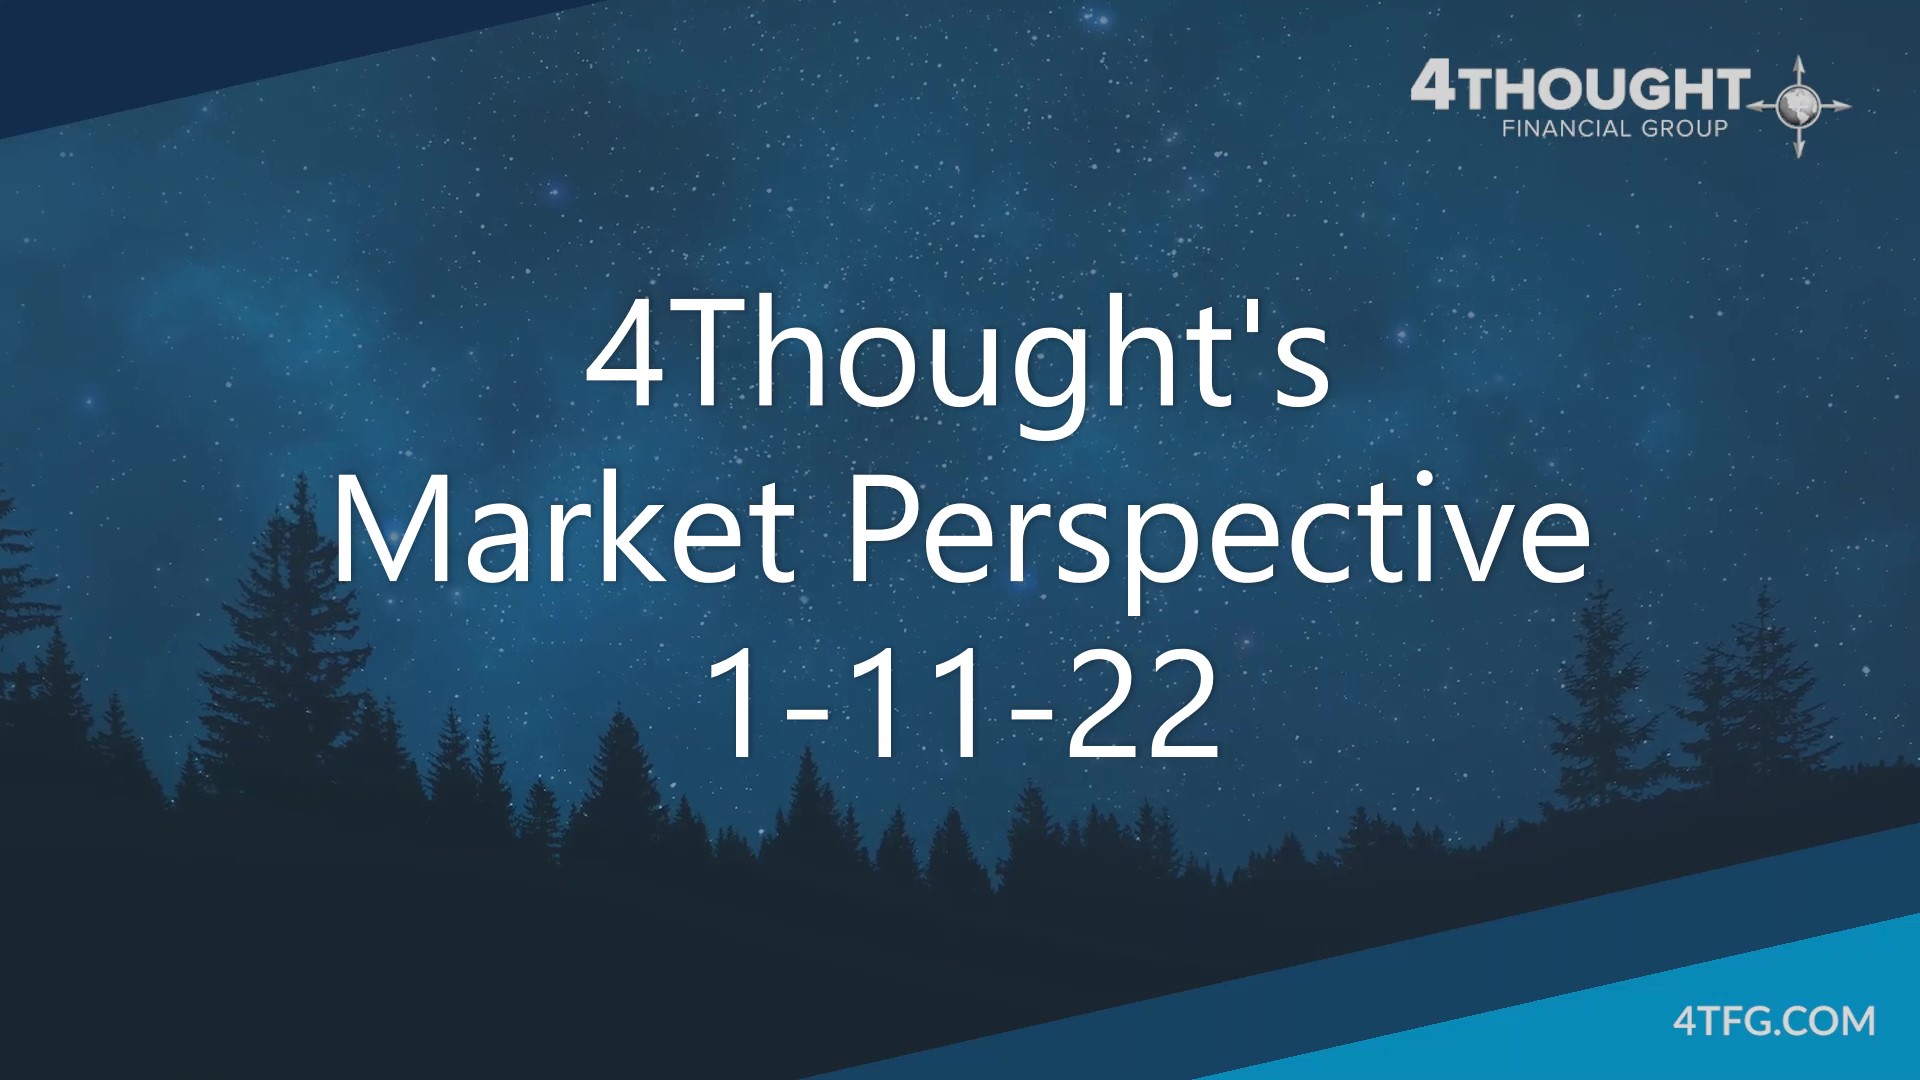 4Thought’s Market Perspective 1-11-22